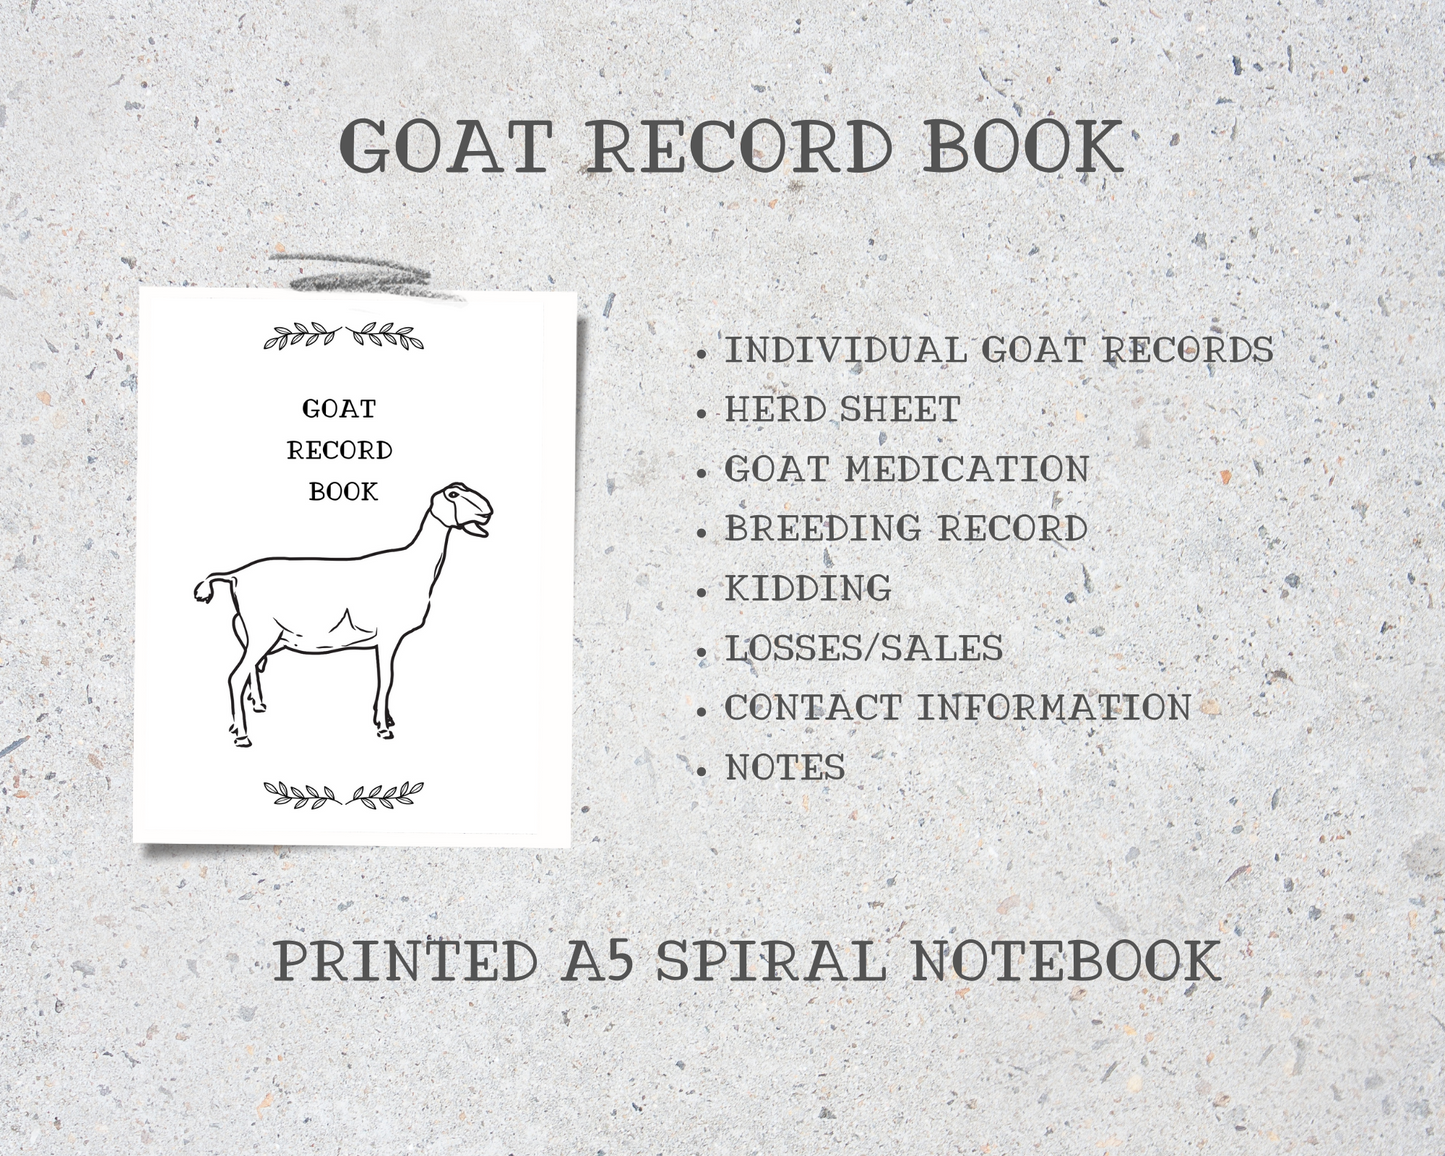 Goat Records Book